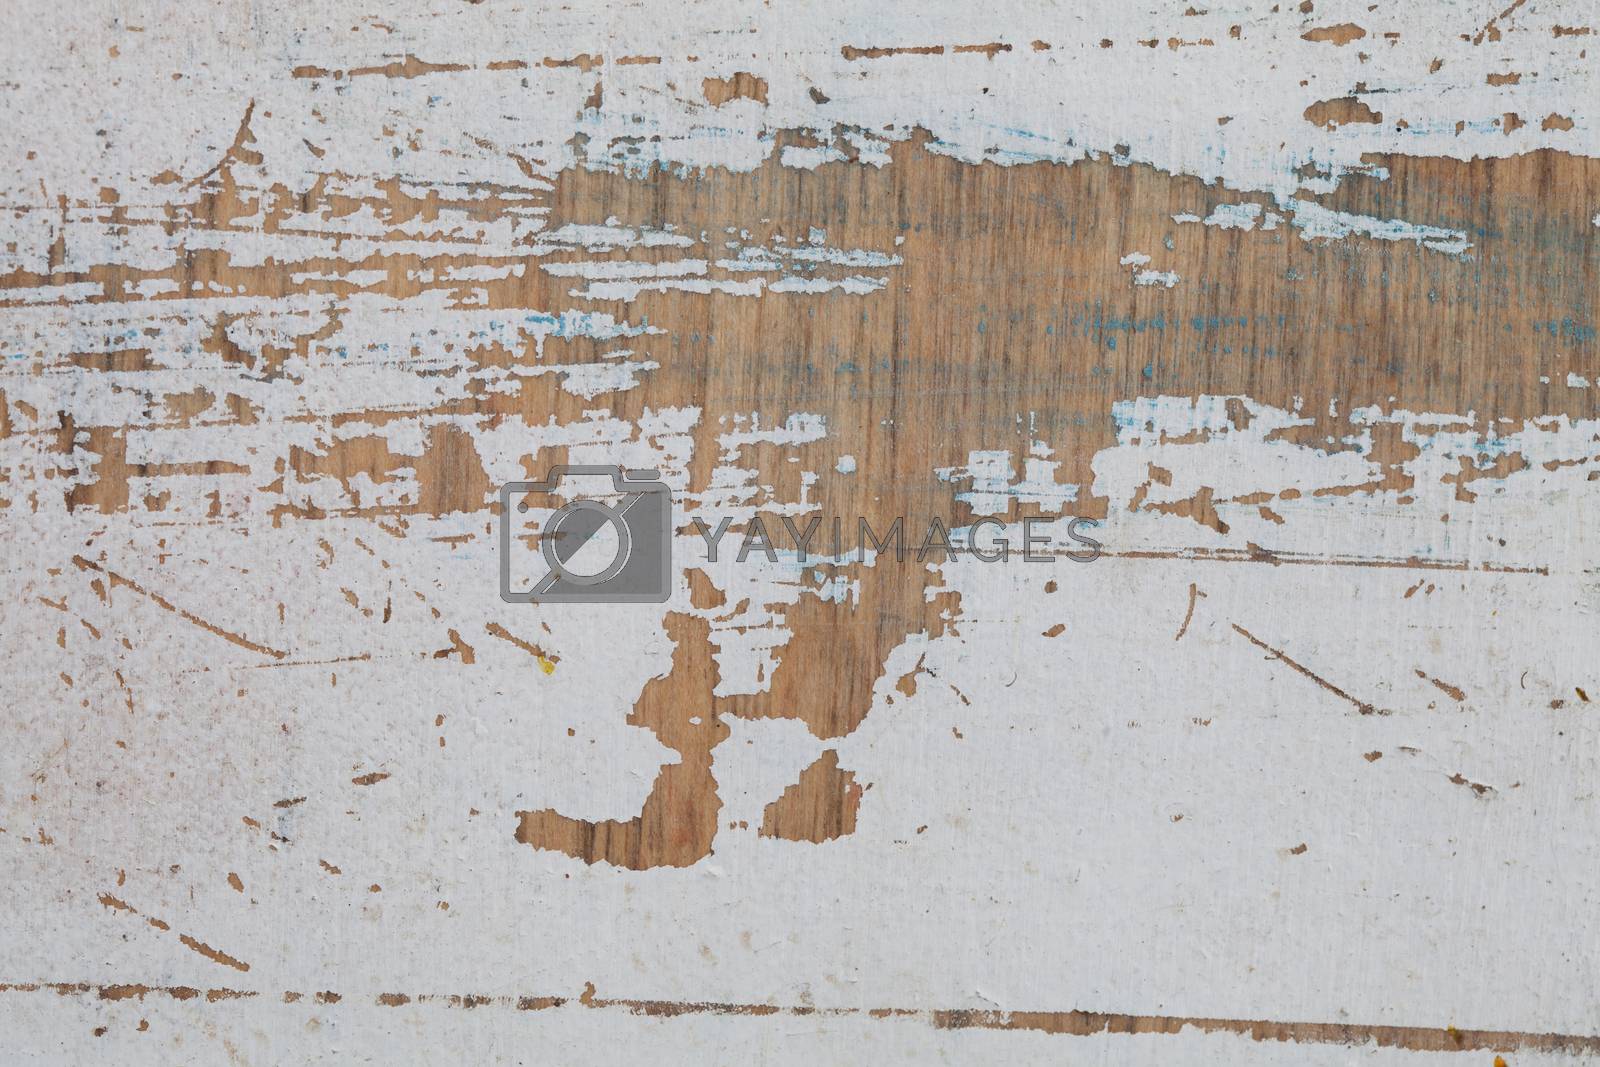 Royalty free image of Old painted surface by Supertooper